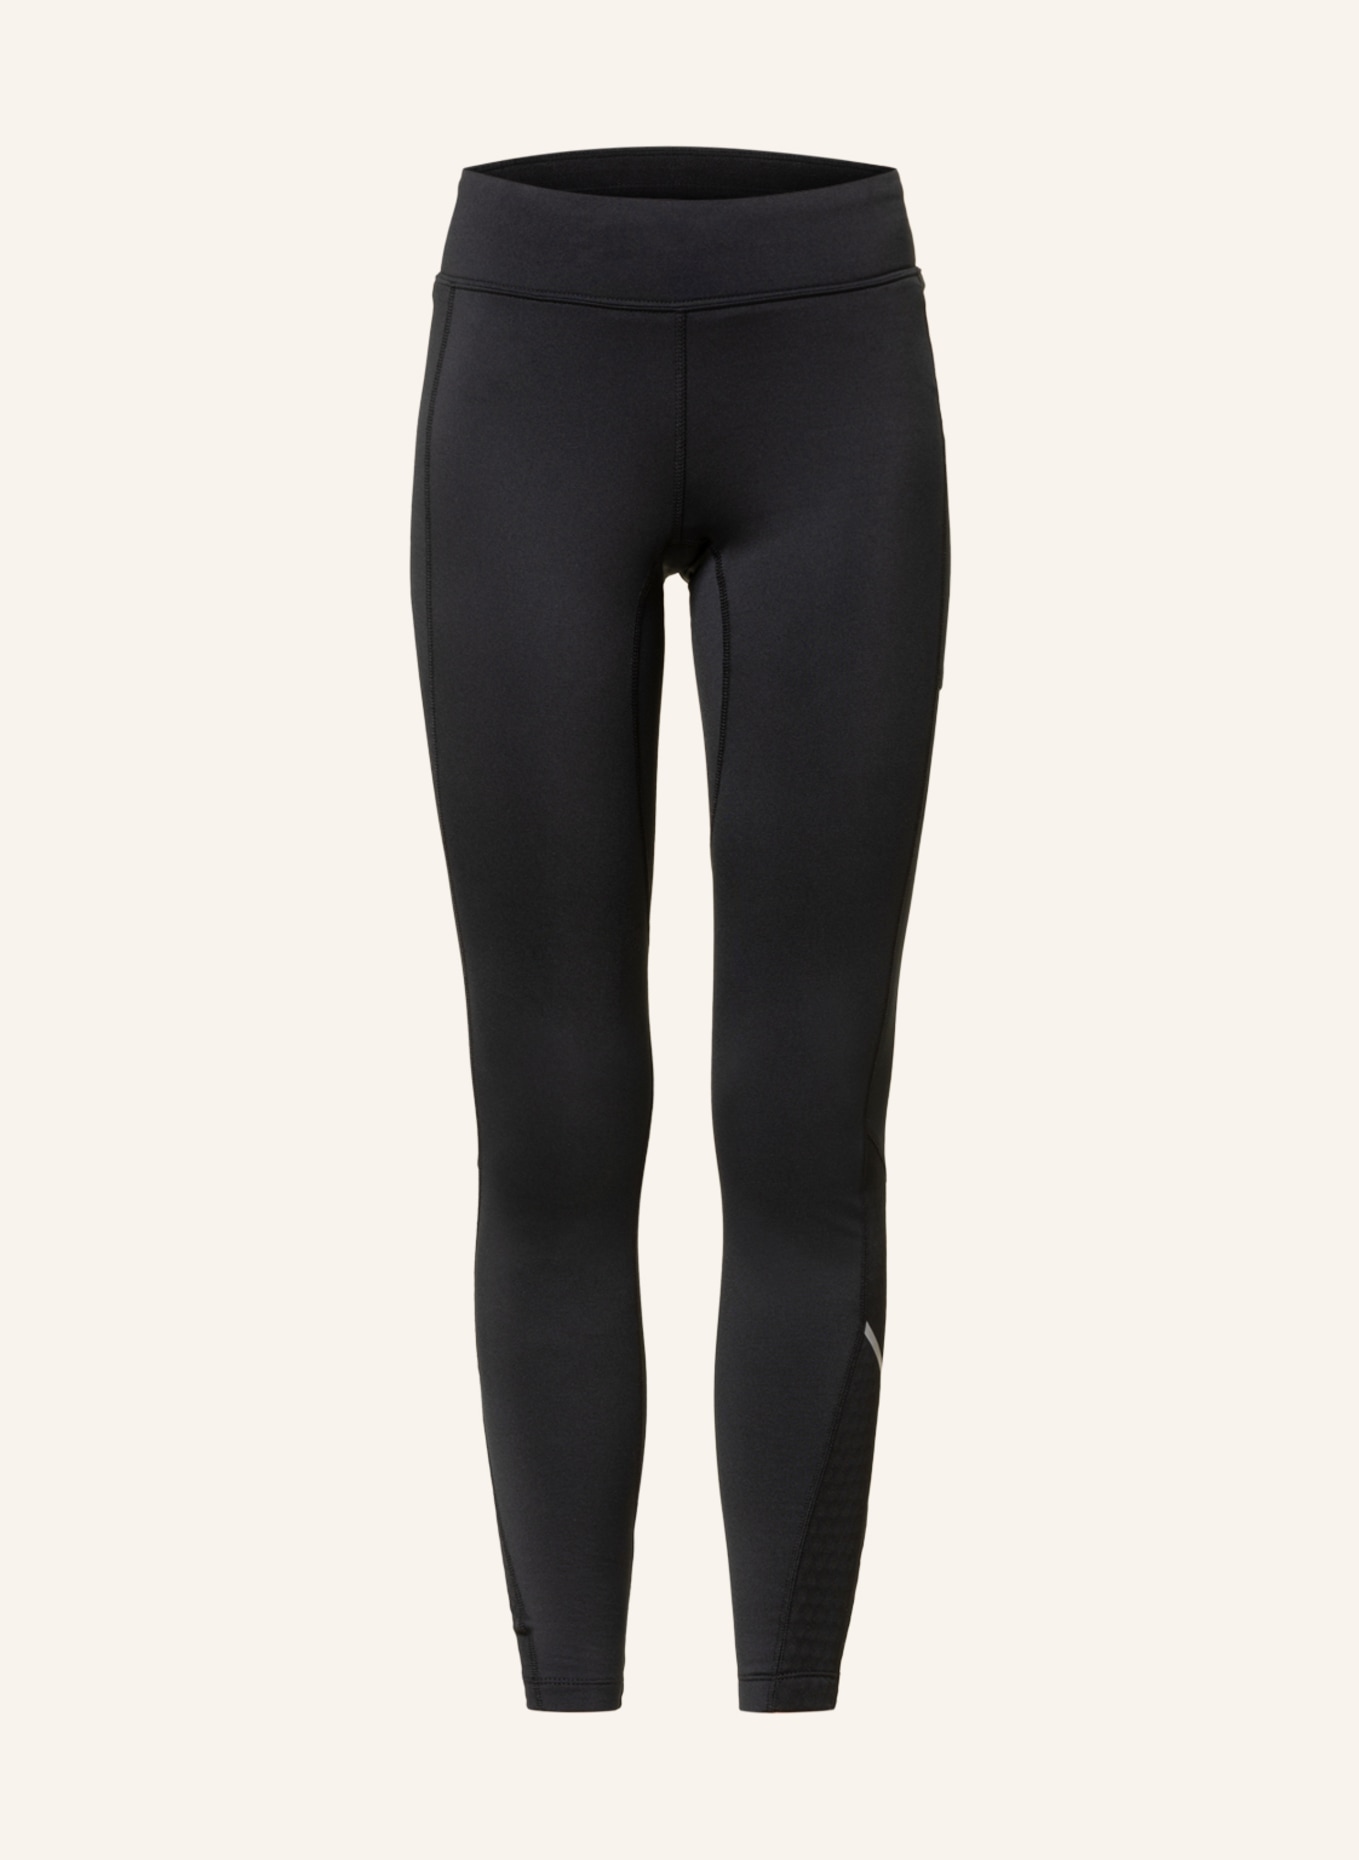 GORE RUNNING WEAR 7/8 tights R3, Color: BLACK (Image 1)